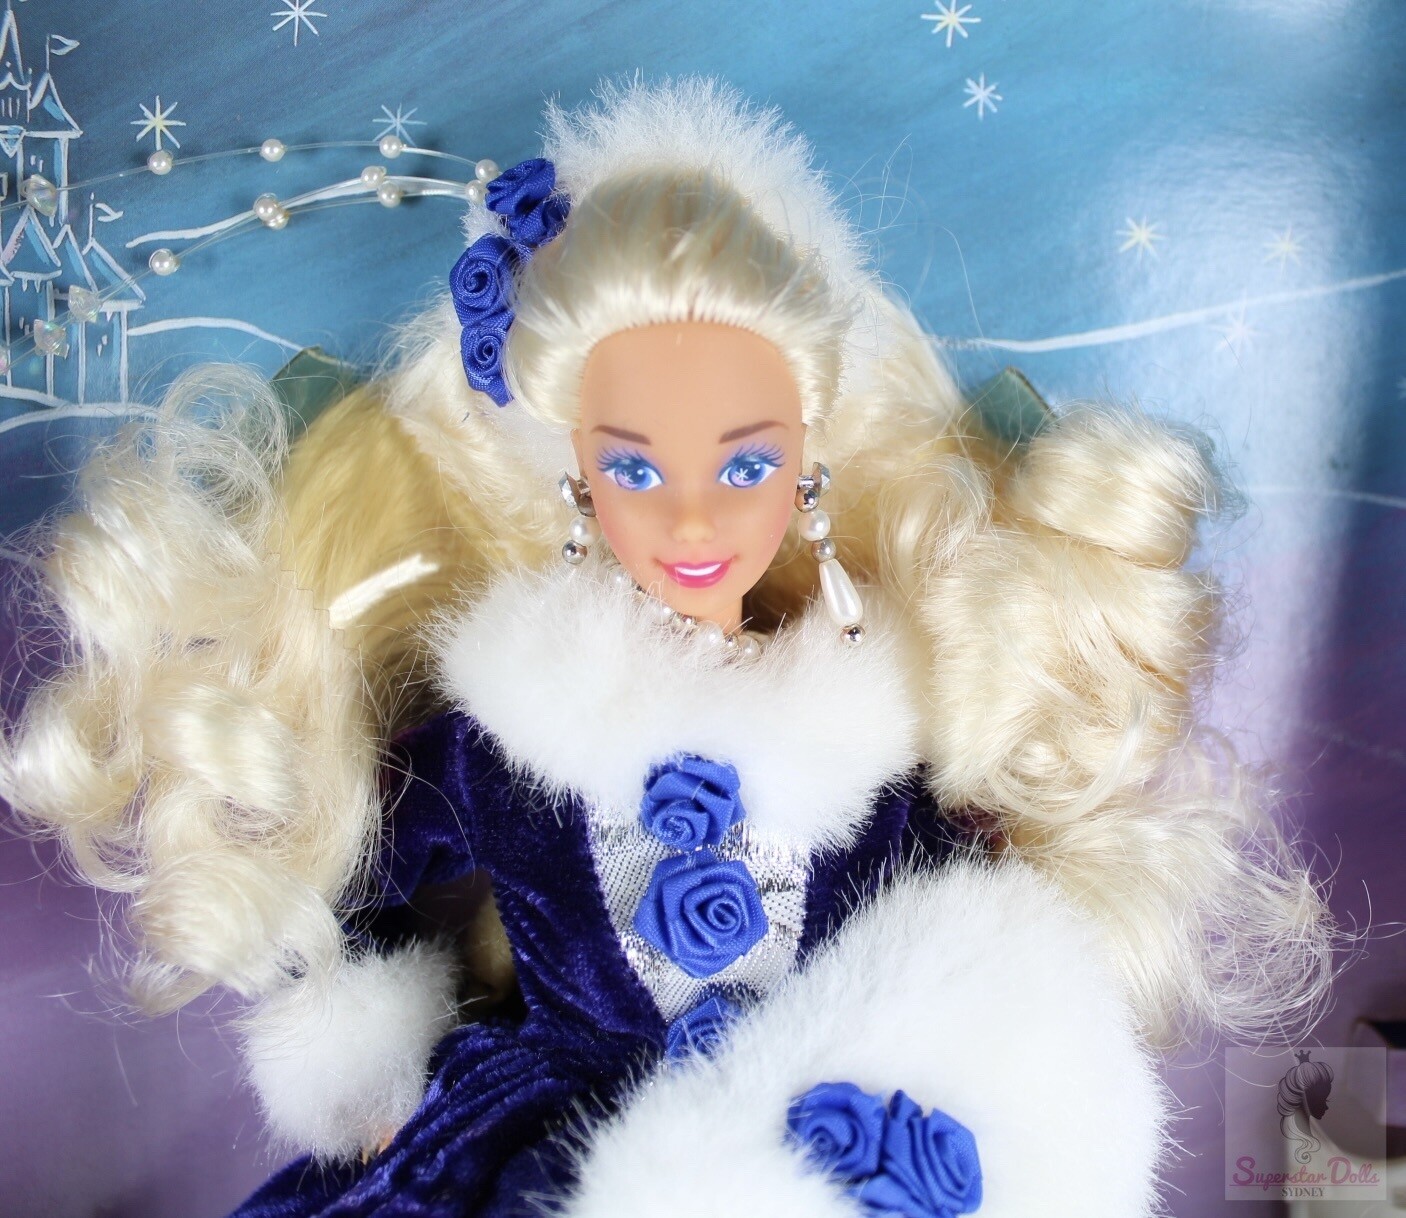 1993 Limited Edition: Winter Princess Barbie Doll